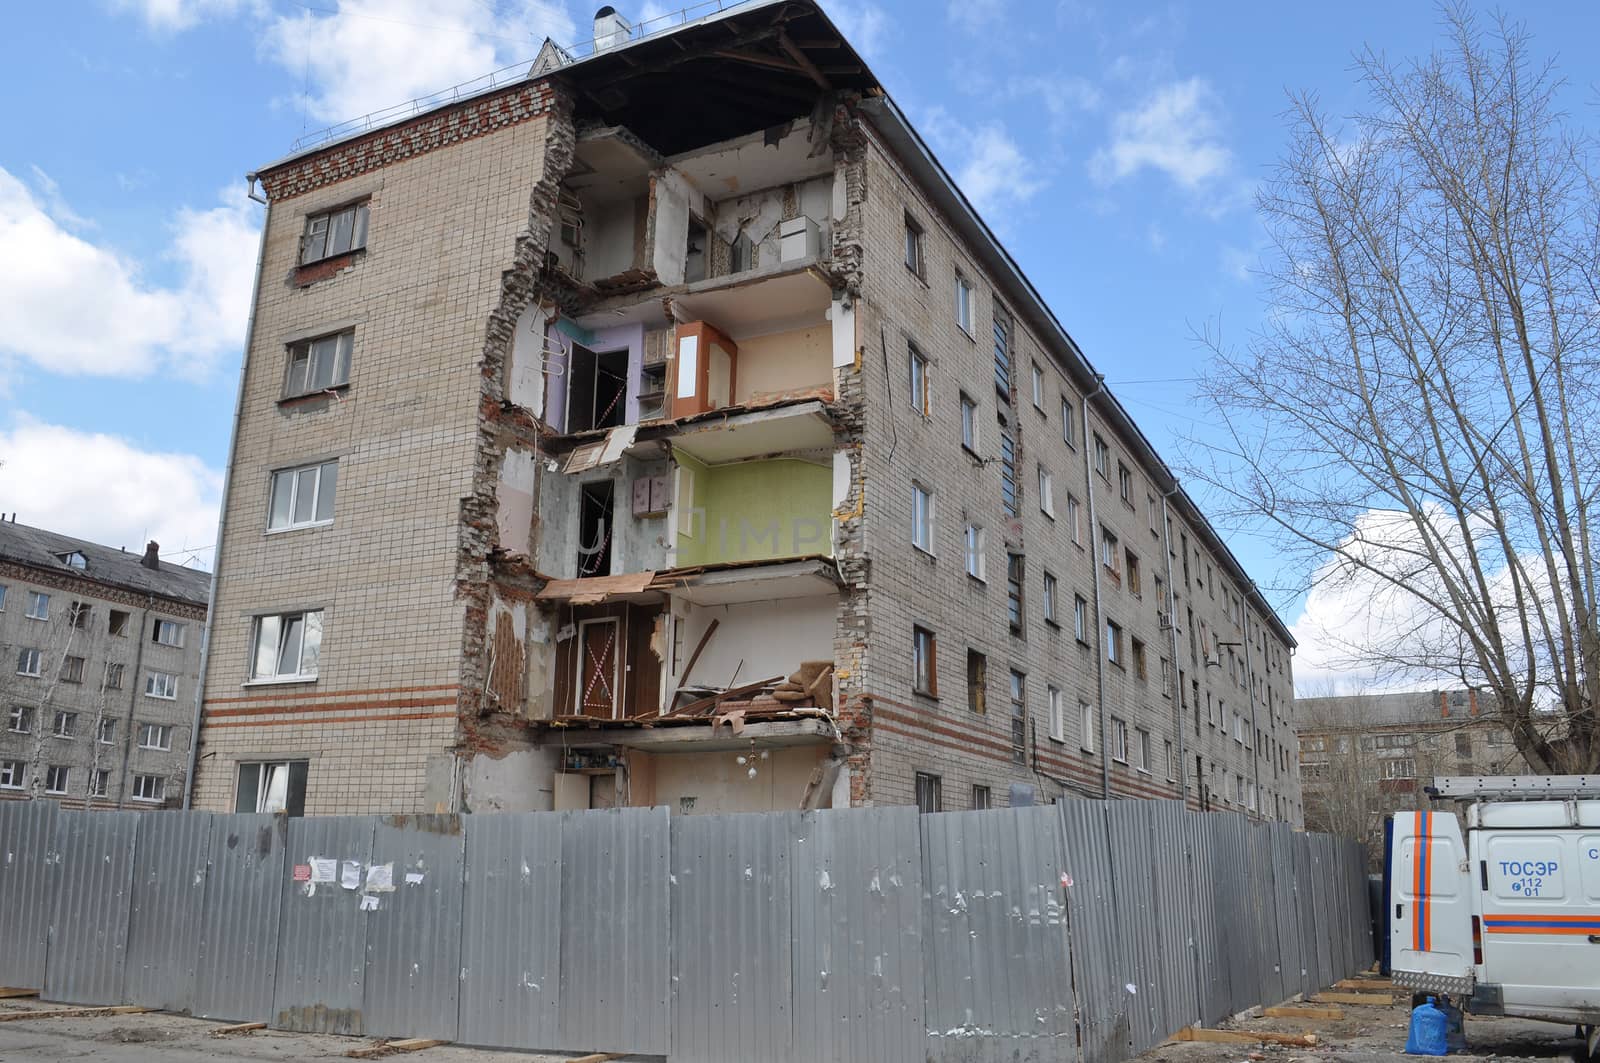 Collapse of a corner of the inhabited five-floor house. Tyumen, Russia